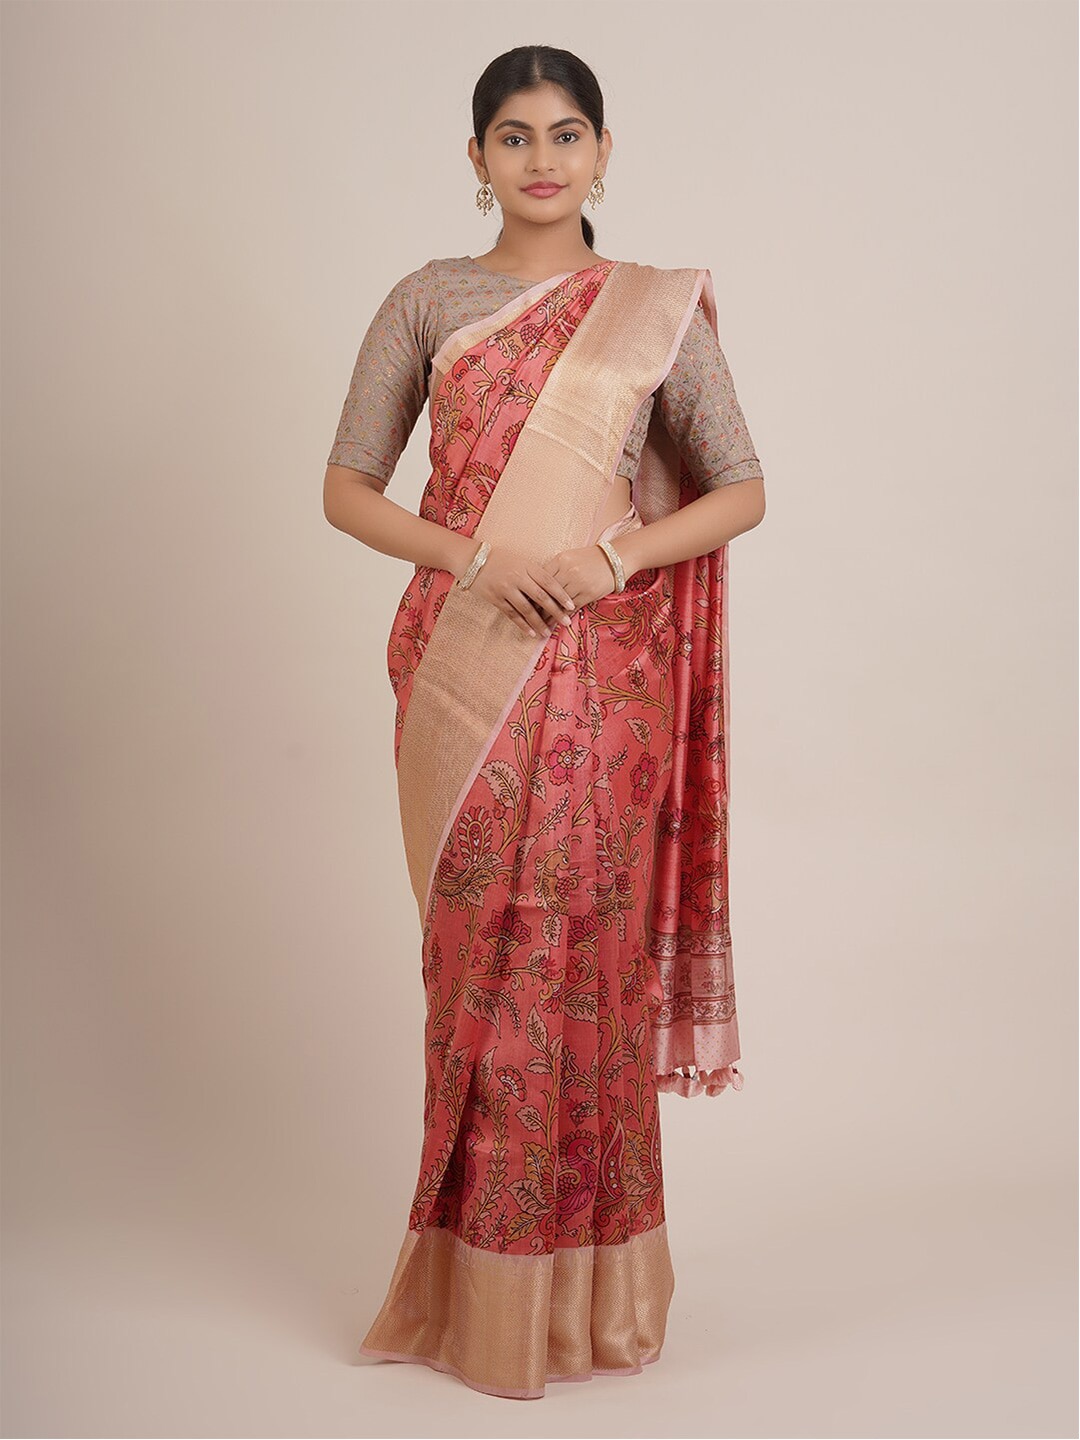 Pothys Pink And Gold Toned Ethnic Motifs Printed Zari Border Pure Silk Saree Price in India